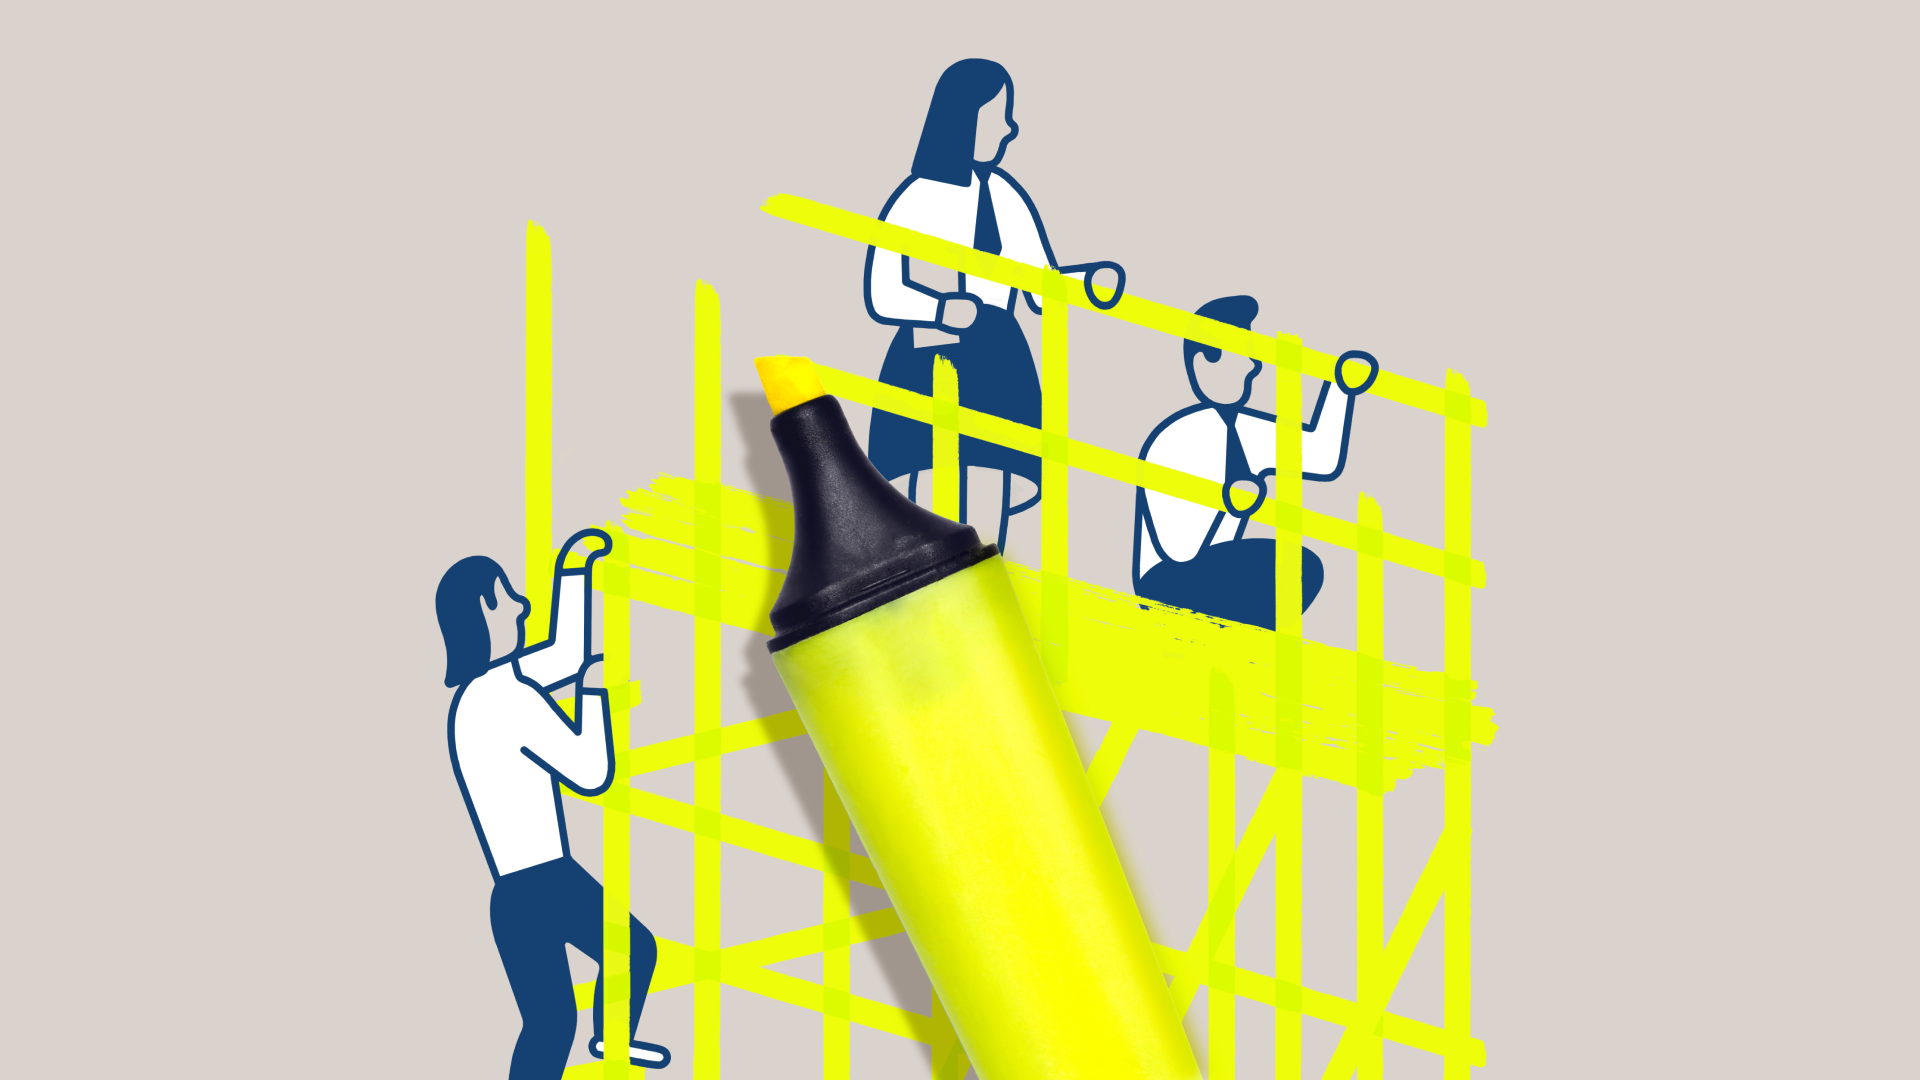 An illustration of workers on construction scaffolding. The scaffolding is drawn with yellow highlighter, evoking the office environment.